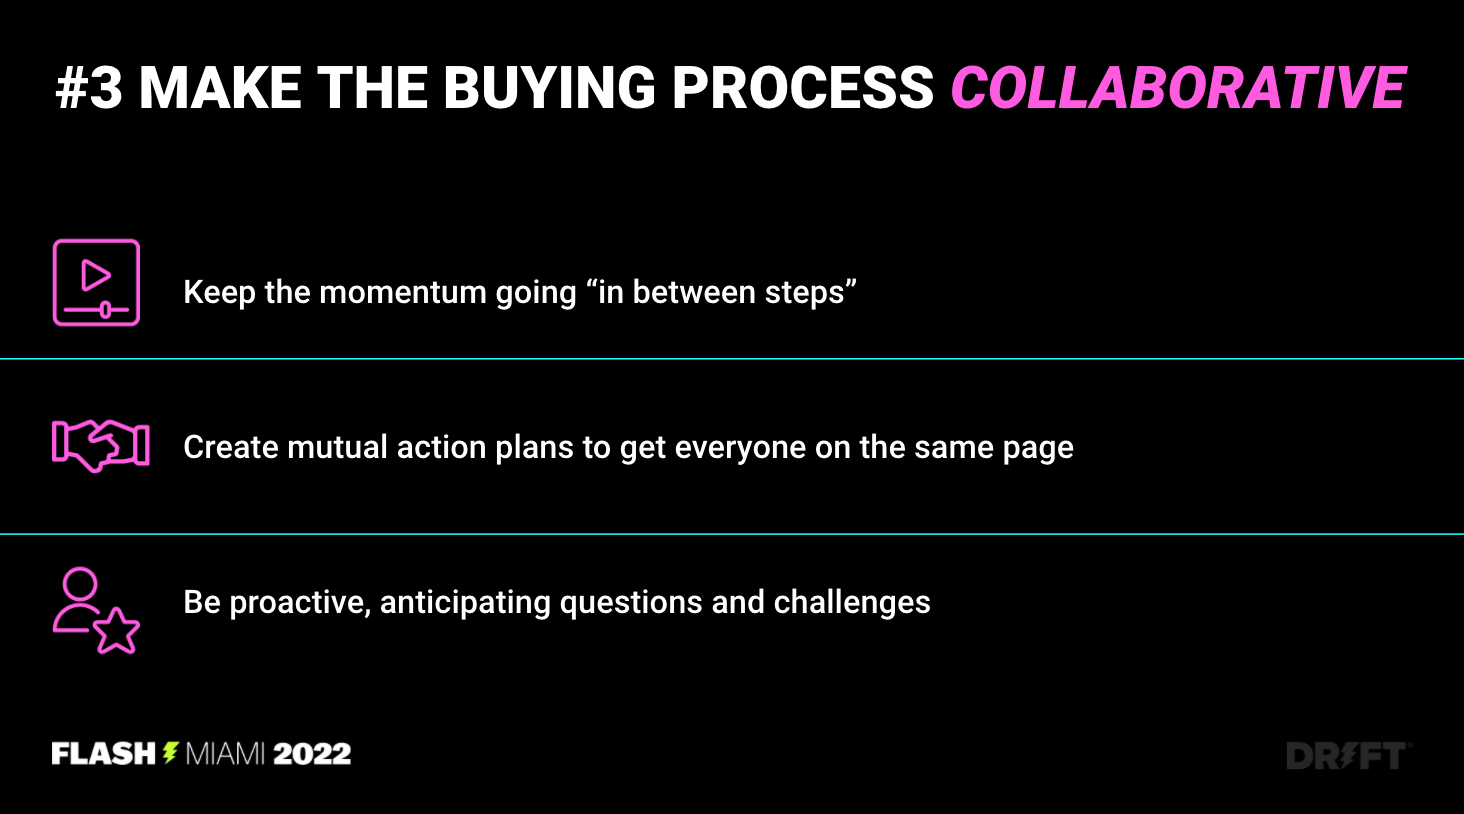 Make the buying process collaborative